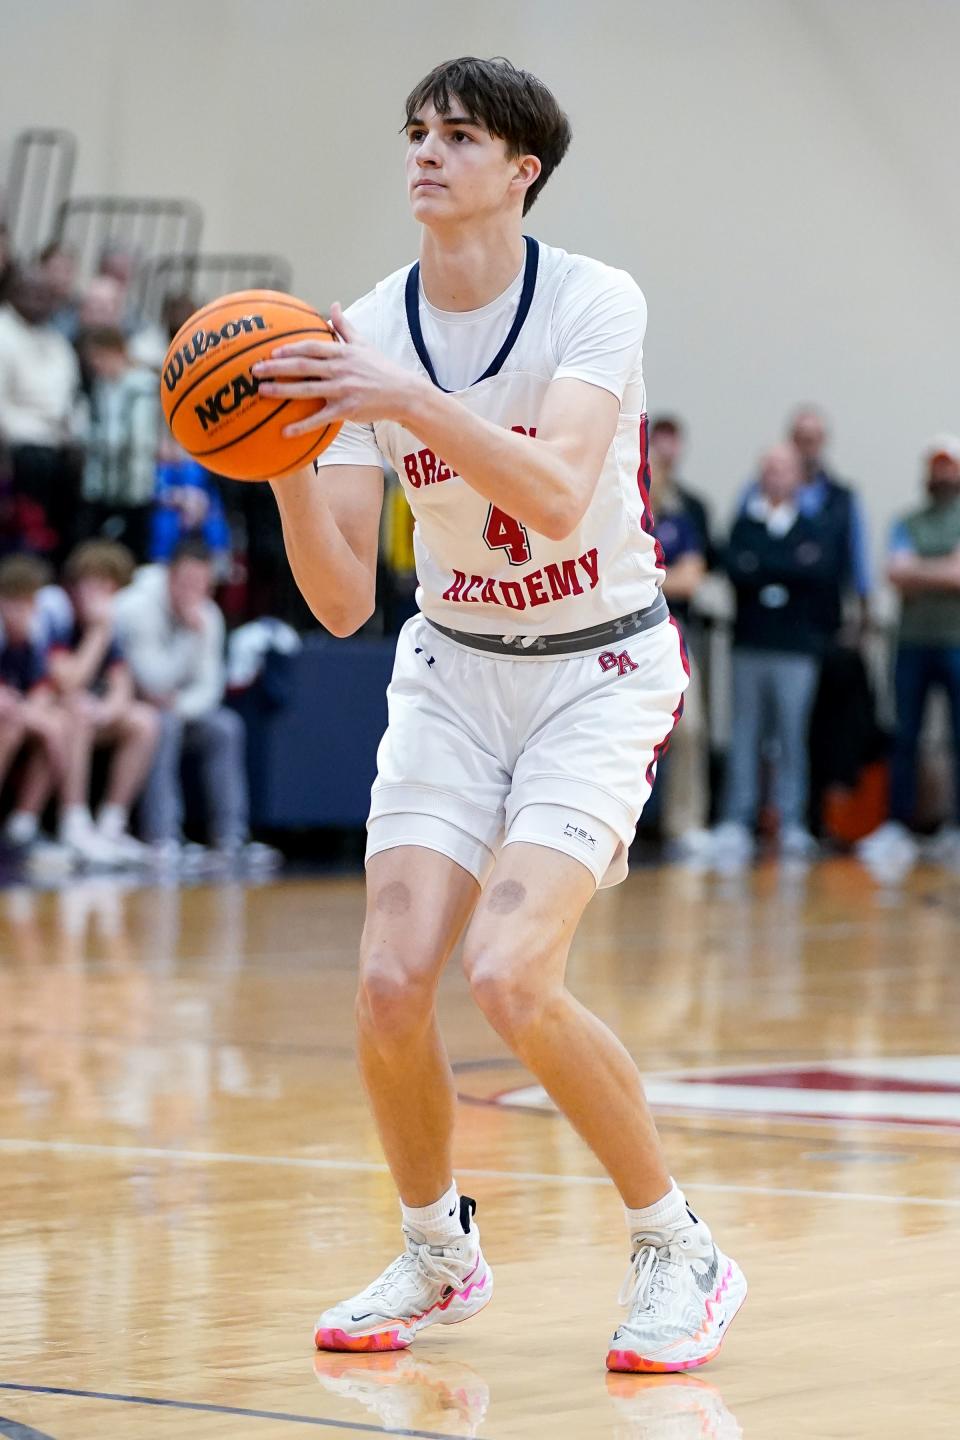 Brentwood Academy’s George MacIntyre (4) sets up to shoot against Ensworth during the first quarter at Brentwood Academy in Brentwood, Tenn., Friday, Jan. 13, 2023.